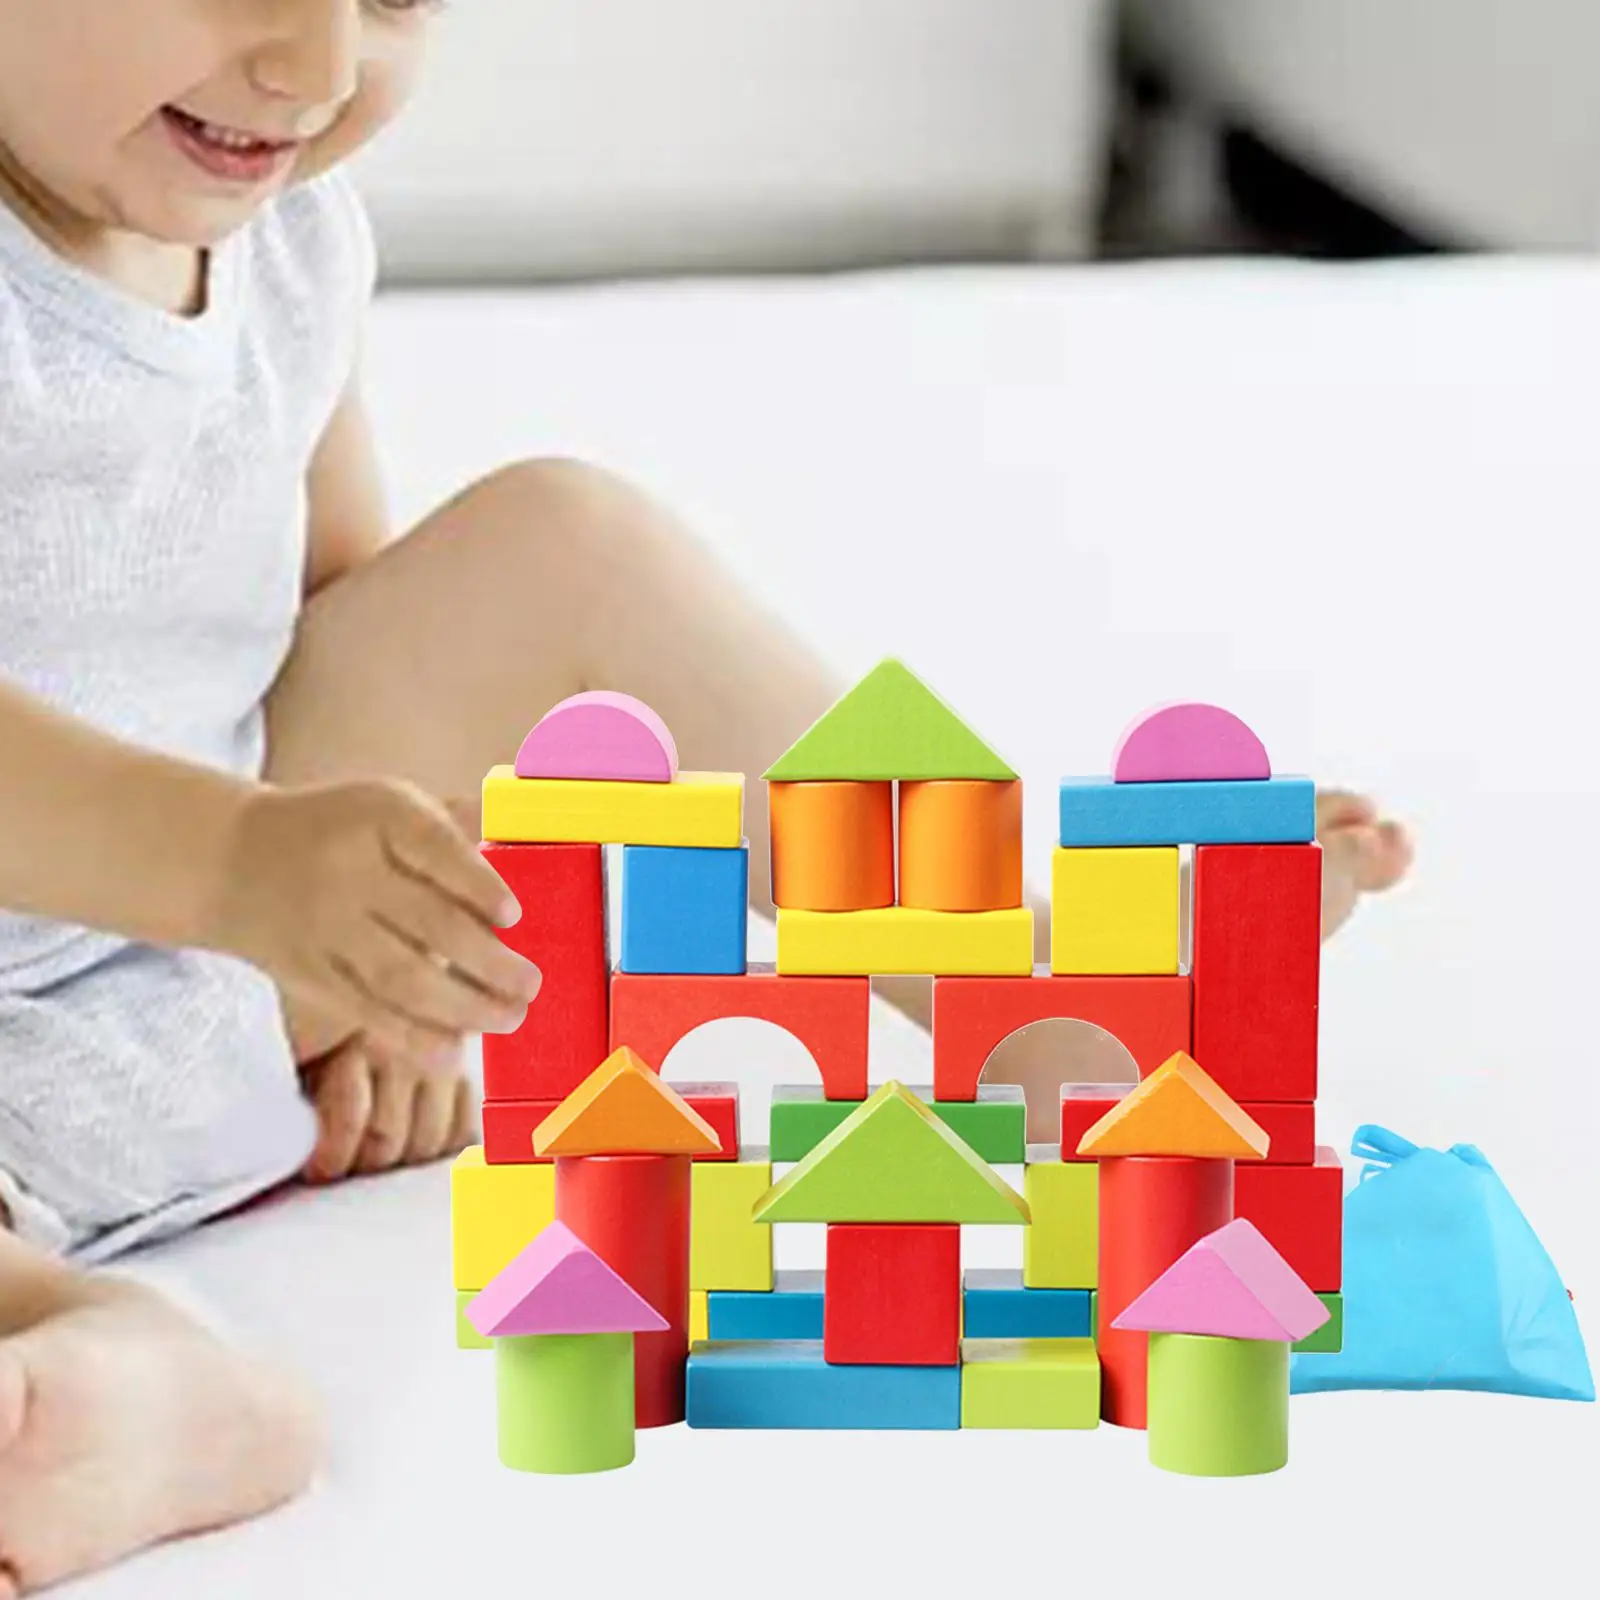 40 Pieces Montessori Building Blocks Education for Children Holiday Gifts